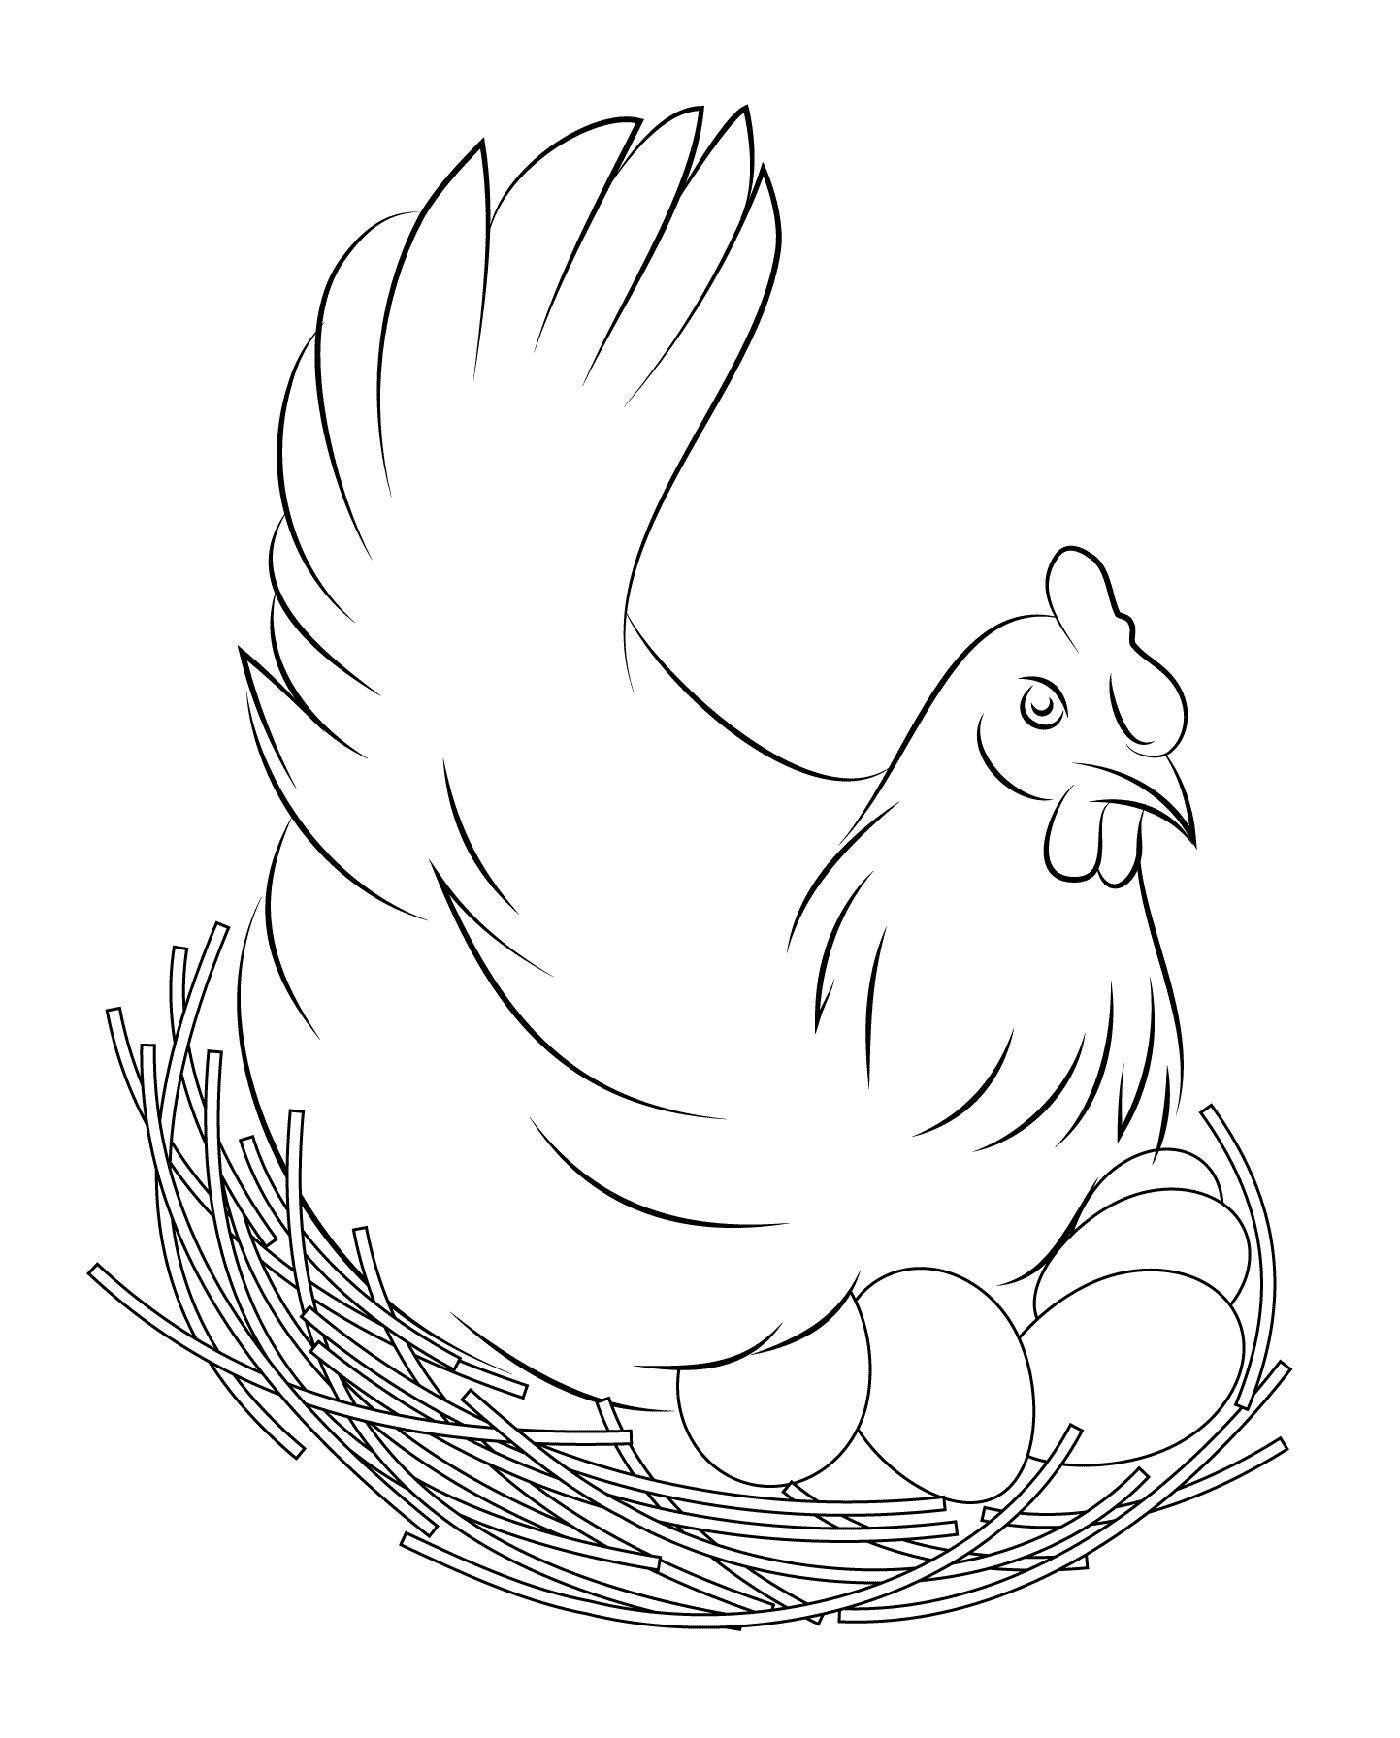 Chicken Coloring Pages to Print for Kids and Adults   101 ...